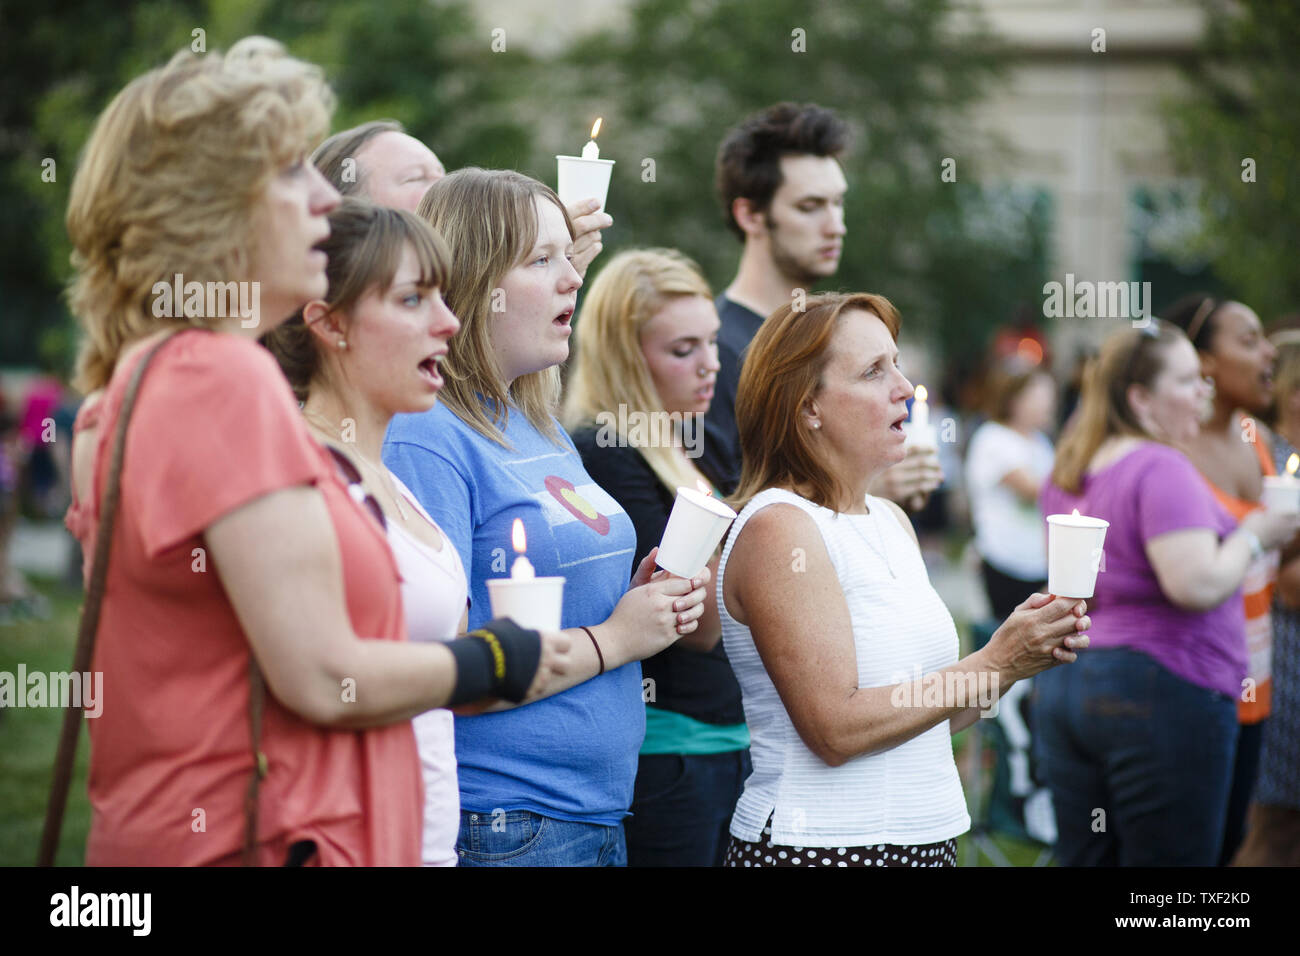 Megan Saunders (blue shirt) sings Amazing Grace with her friends and family during prayer vigil at the Aurora Municipal Center on July 22, 2012 to honor the victims of last Friday's movie theater mass shooting at the Century 16 Movie theater complex in Aurora, Colorado.  Saunders was in theater 9 at the time of the shooting.  Suspect James Holmes, 24, allegedly went on a shooting spree, killing 12 people and injuring 58 during an early morning premier screening of 'The Dark Knight Rises.'  UPI/Trevor Brown, Jr. Stock Photo